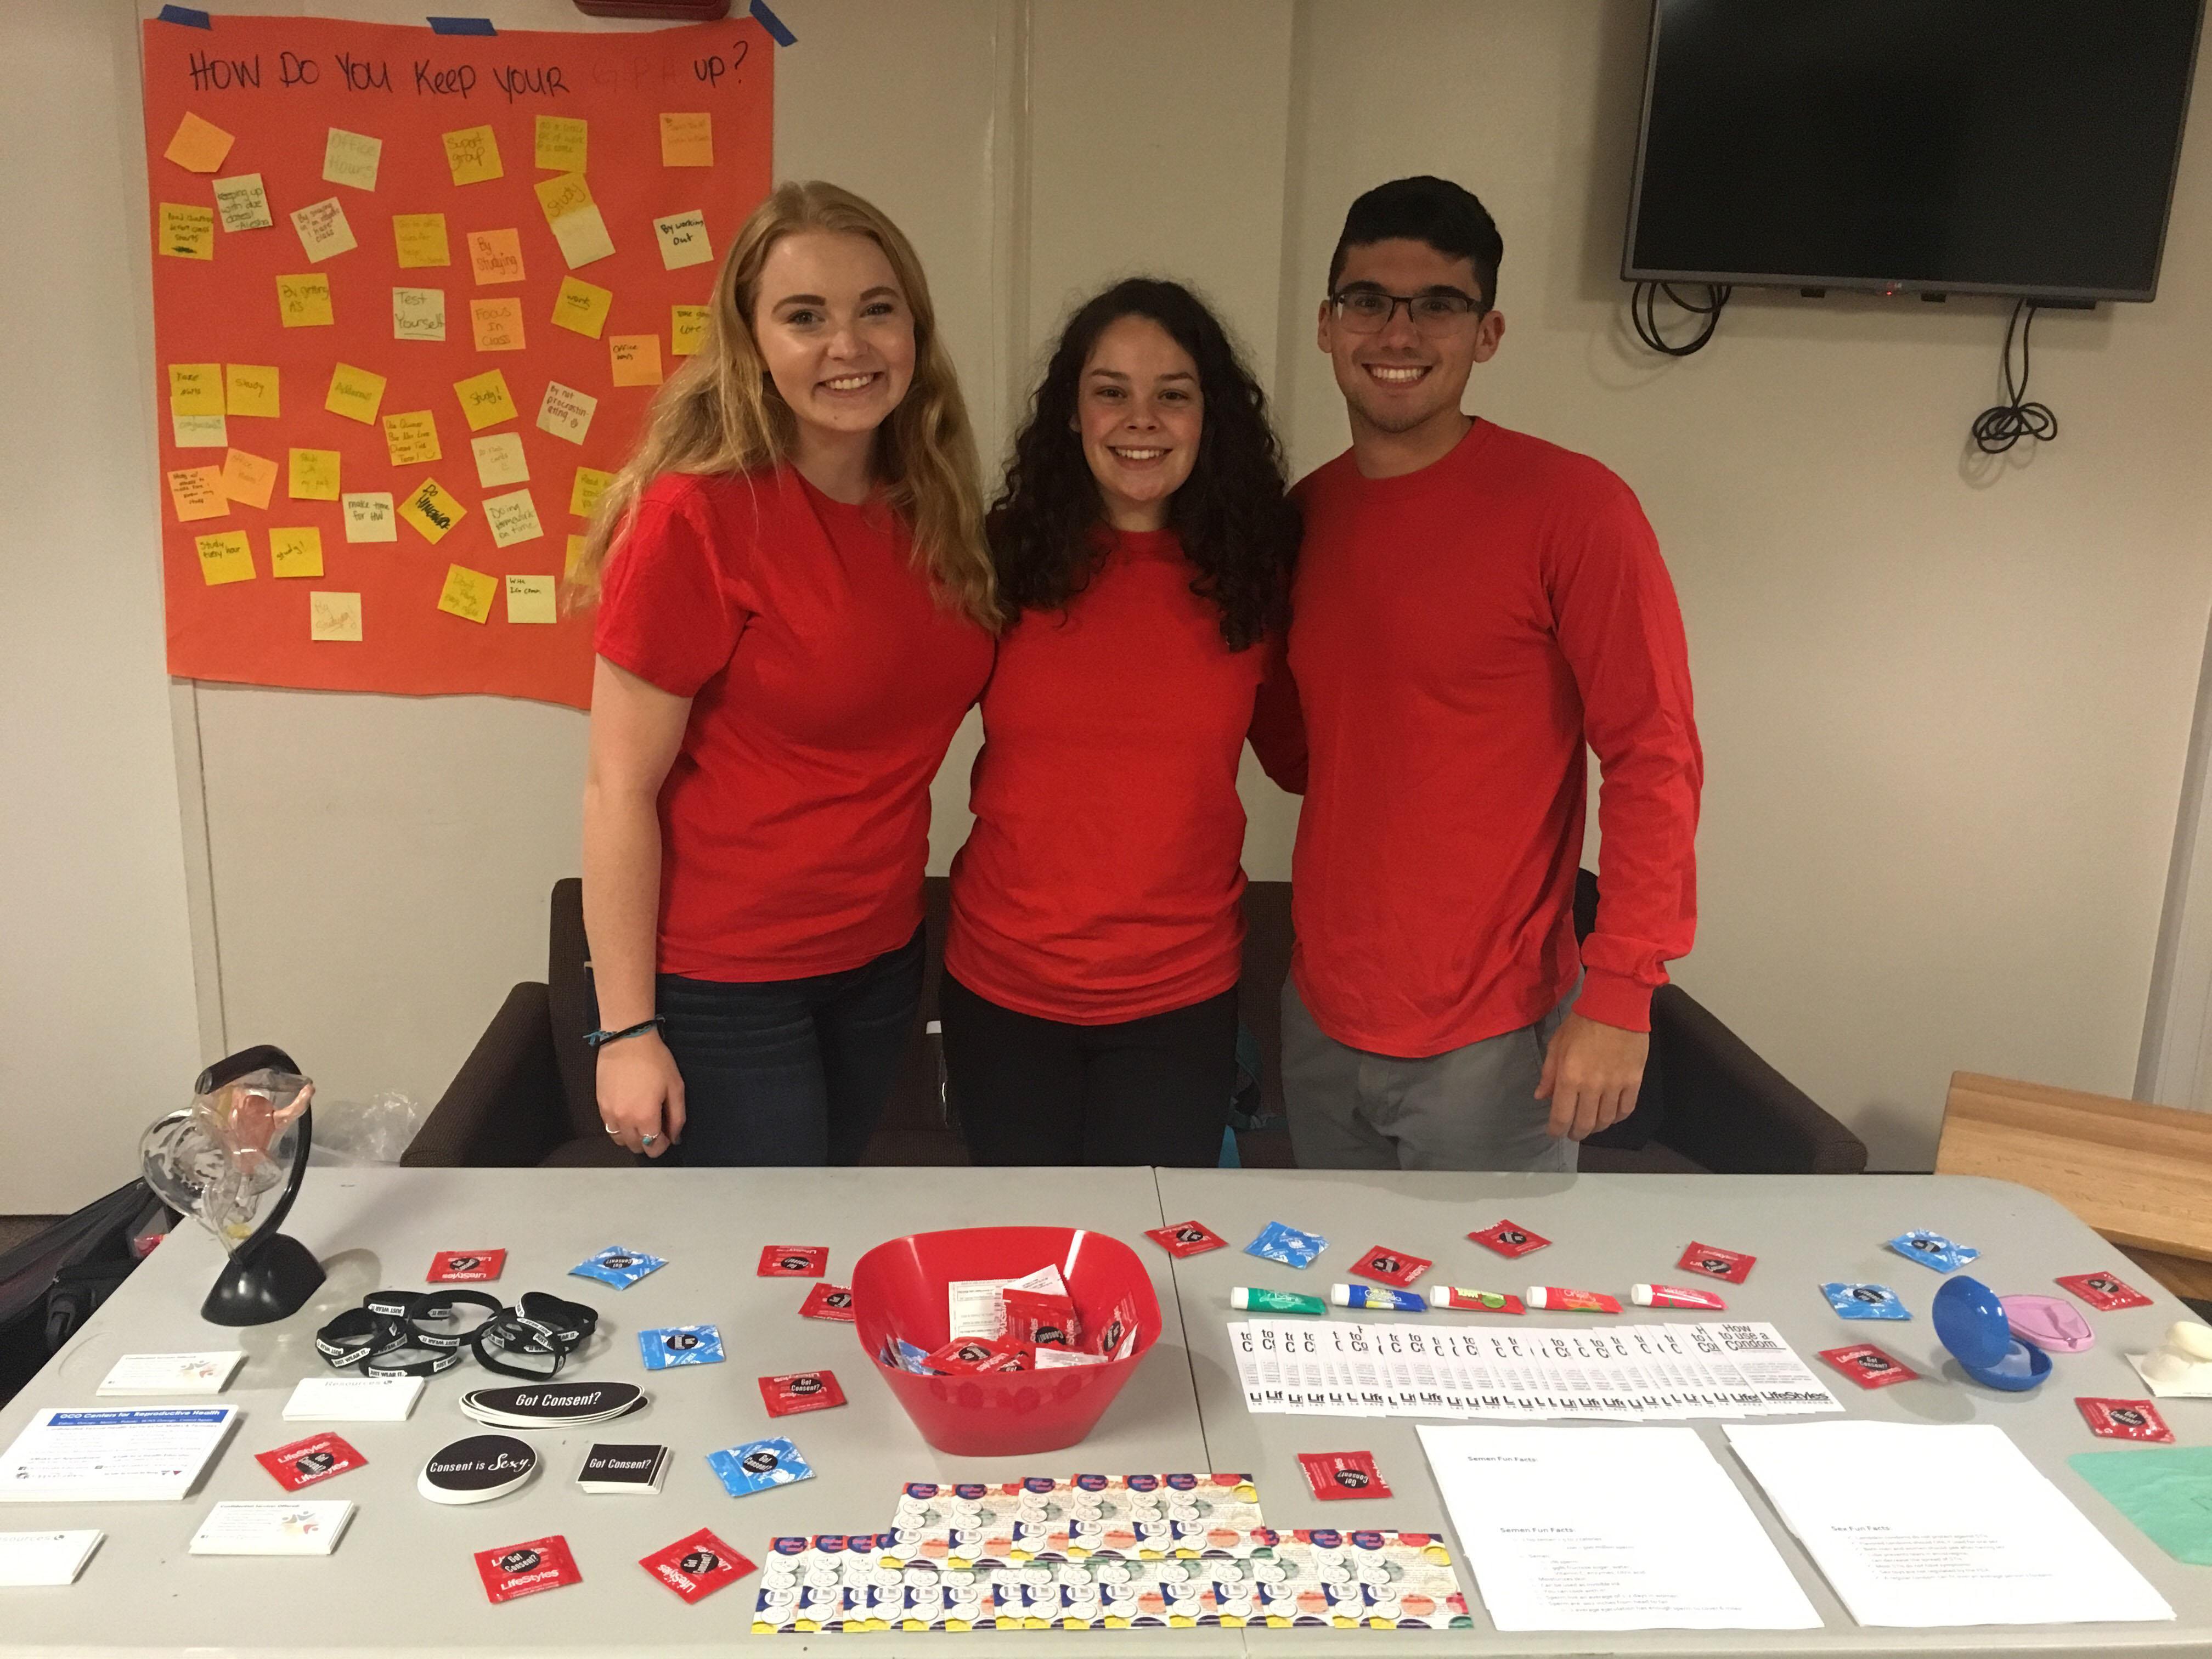 Sexperts team at a tabling event